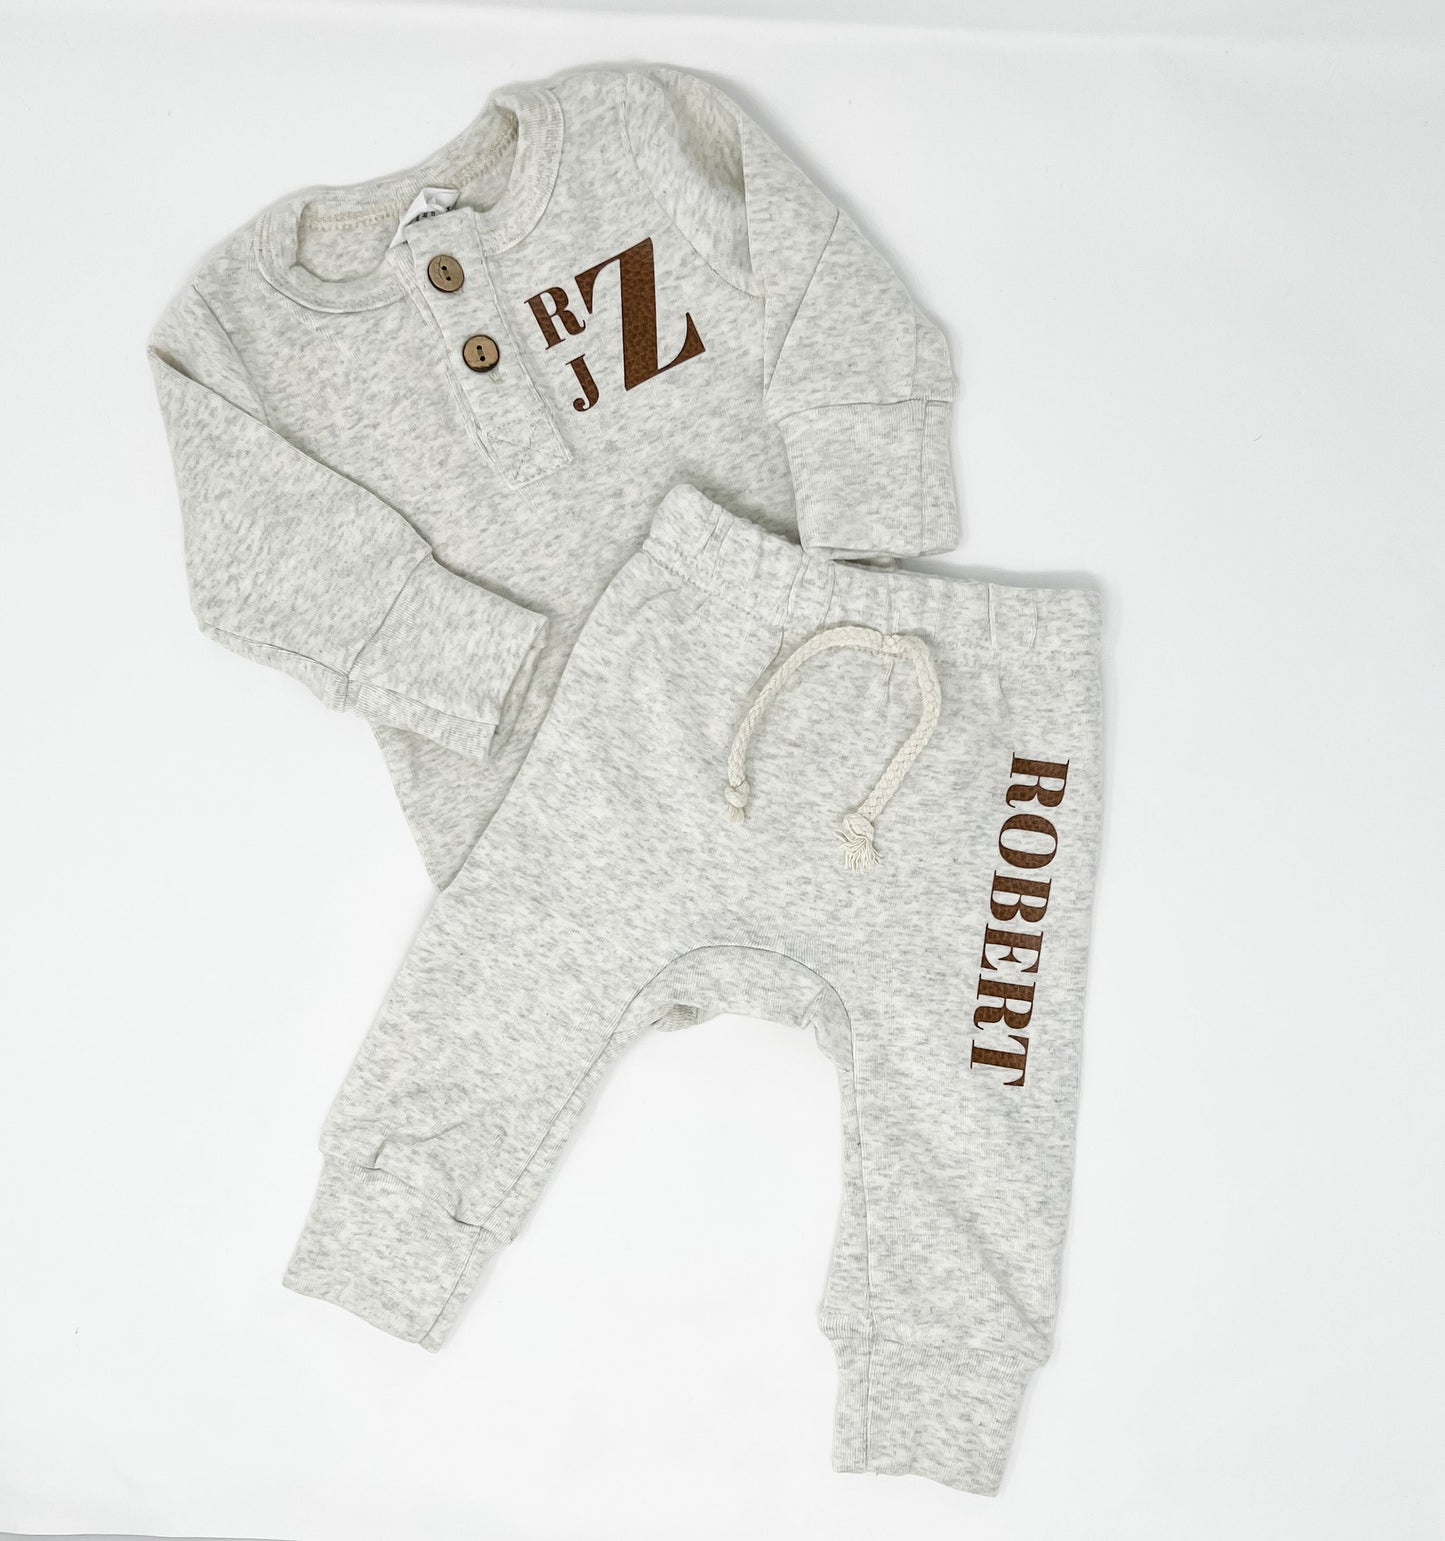 Baby Boy Personalized Name/ Initials Coming Home Set